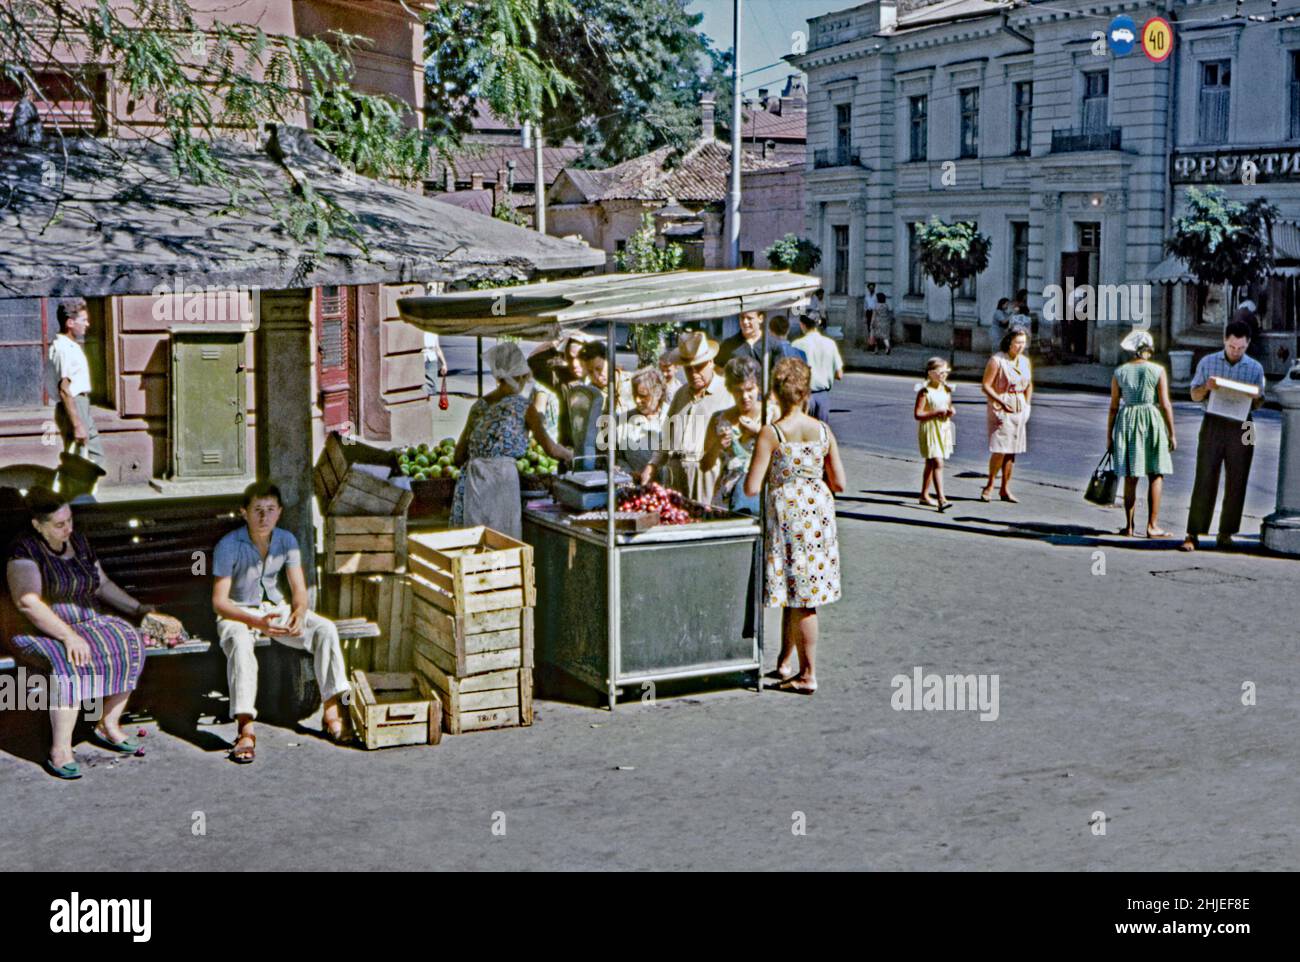 A 1960s photograph of a female street trader selling fruit and vegetables from a roadside undercover stall in the summer sunshine in Moscow, Russia. Often market gardeners and owners of smallholdings from outside the city would come into town each week to sell their home-grown produce. Here it looks like plums and apples are the main attraction for the queue of shoppers. This image is from an amateur Agfacolor 35mm colour transparency – a vintage 1960s photograph. Stock Photo